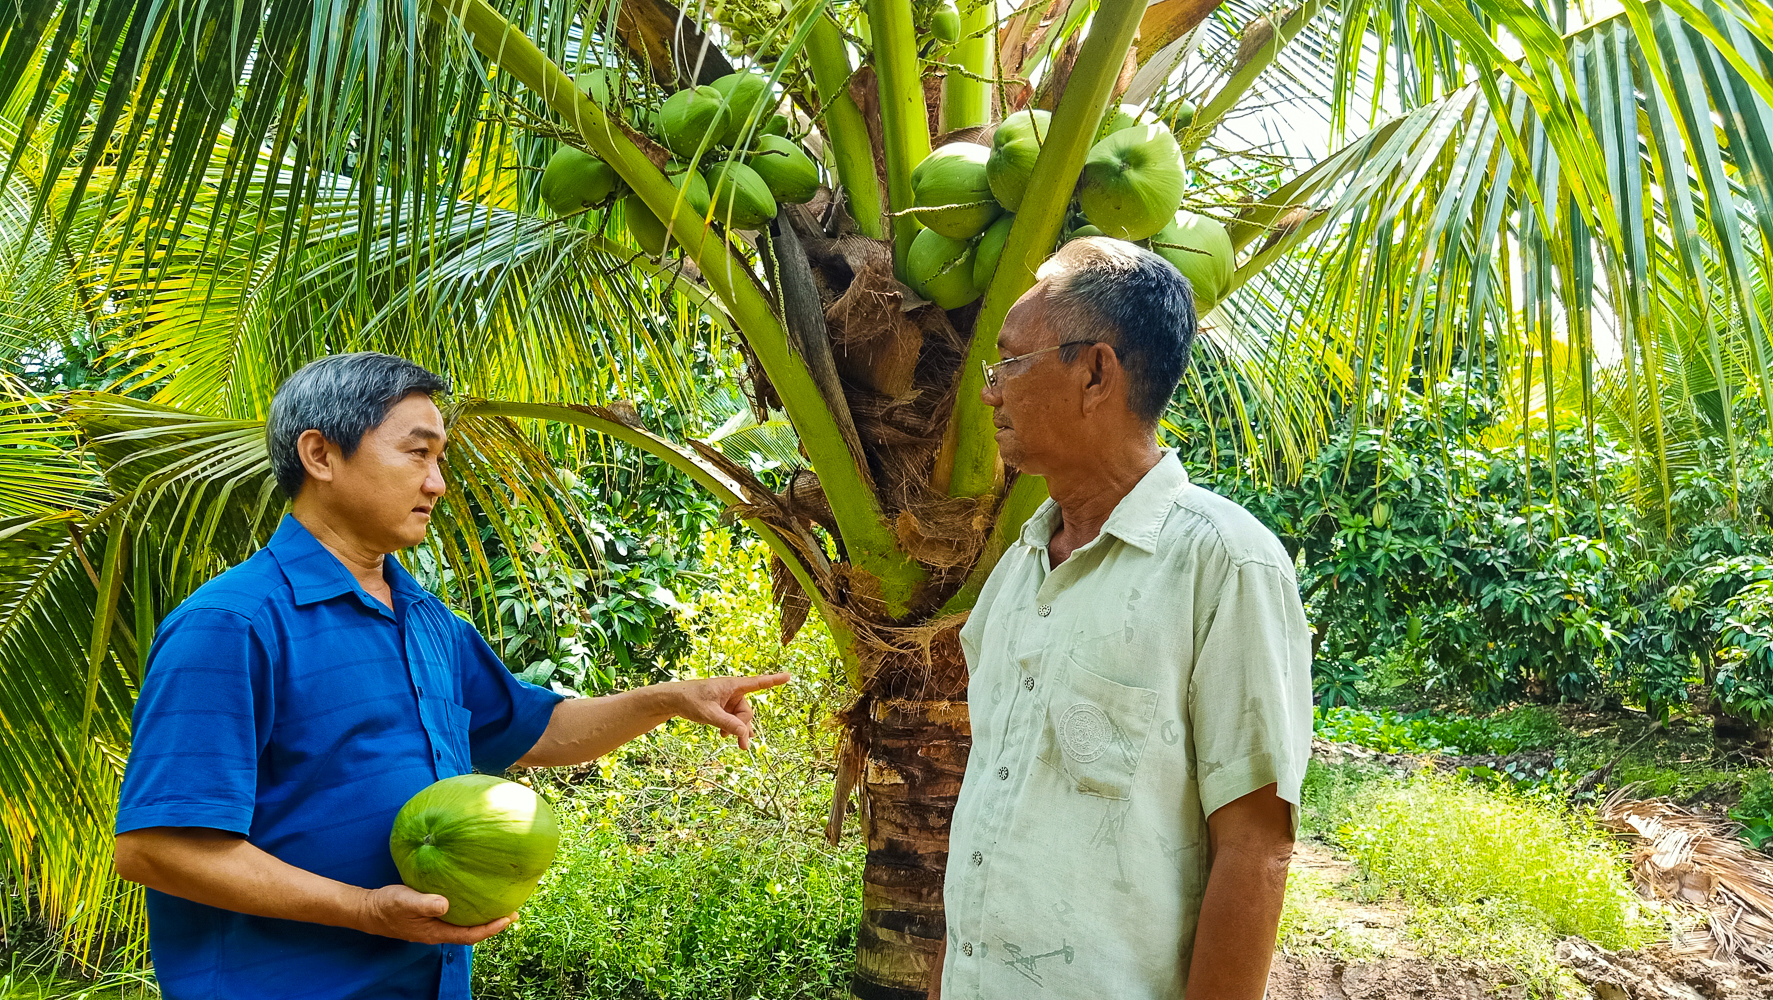 The coconut growing area focuses on organic production in Ke Sach district, Soc Trang province. Photo: Kim Anh.